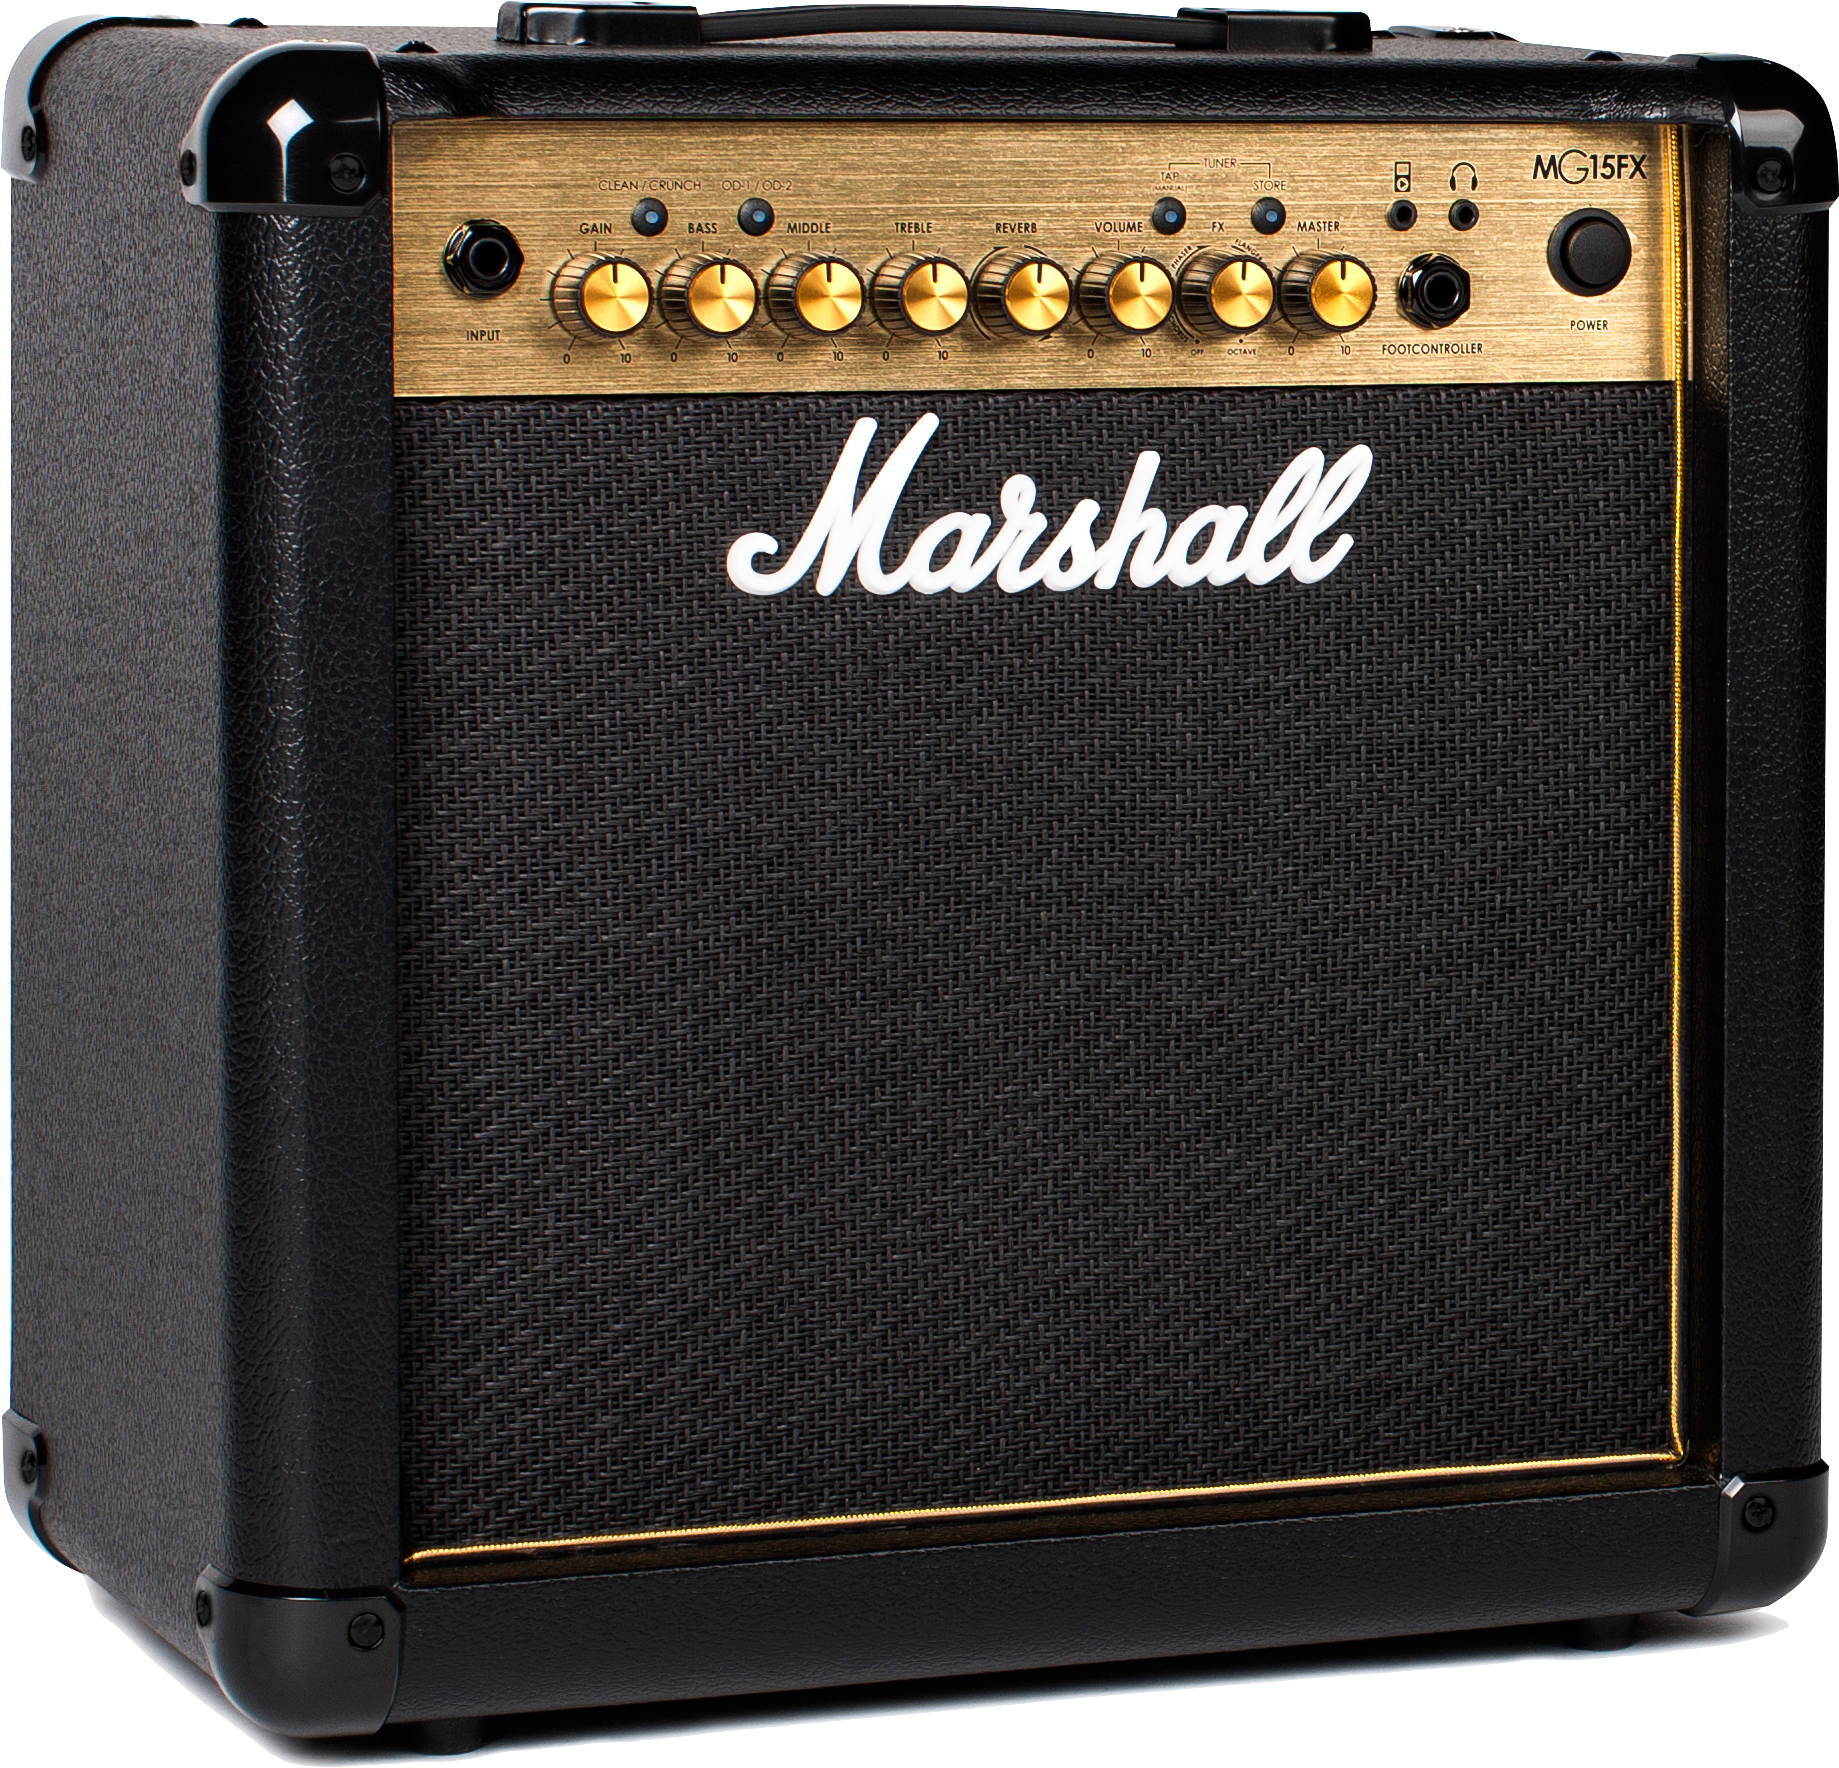 Marshall Mg15fx Mg Gold 15w 1x8 - Electric guitar combo amp - Main picture